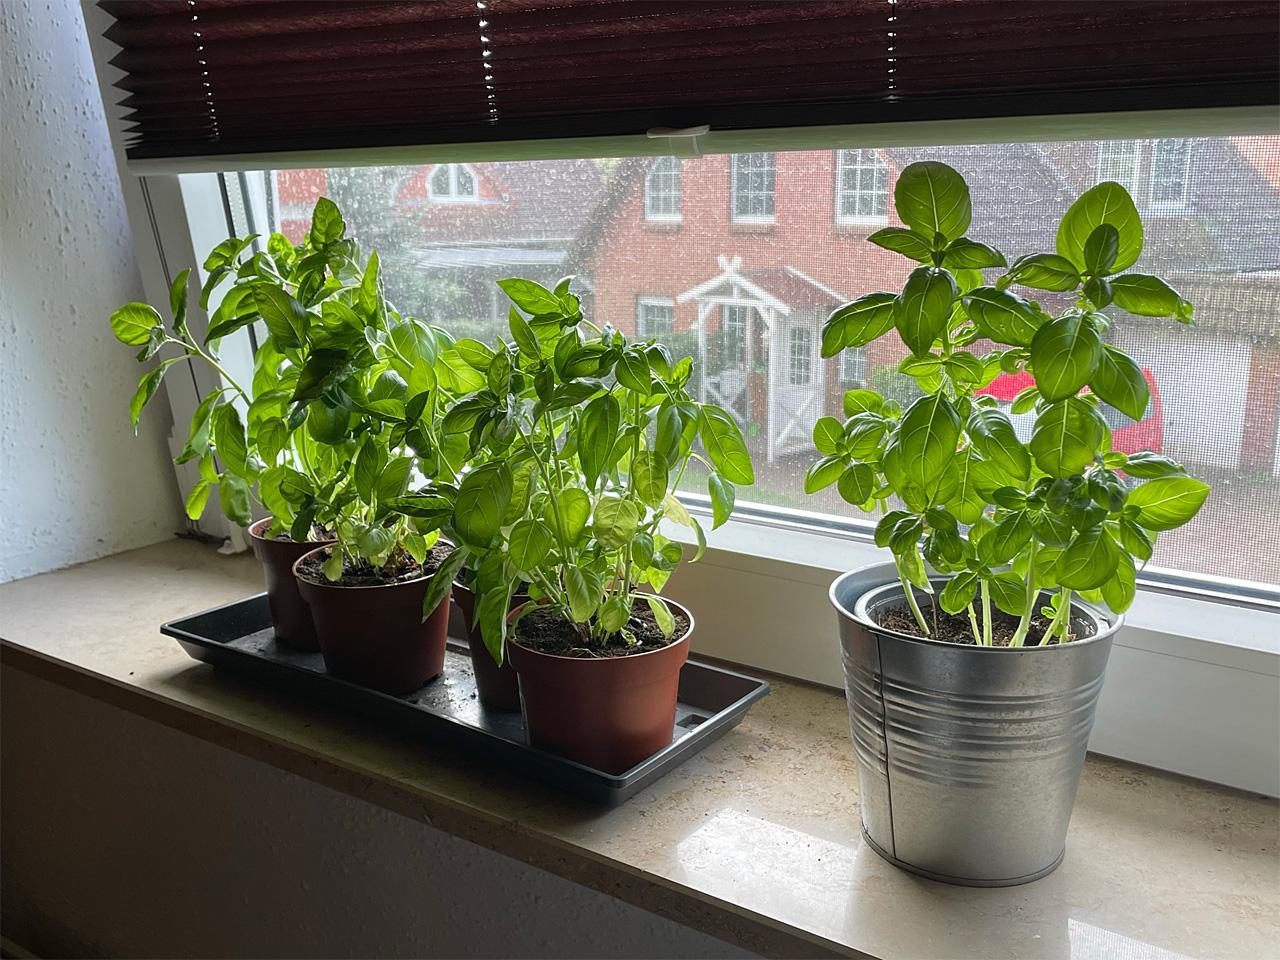 Basil plants home grown from seeds.